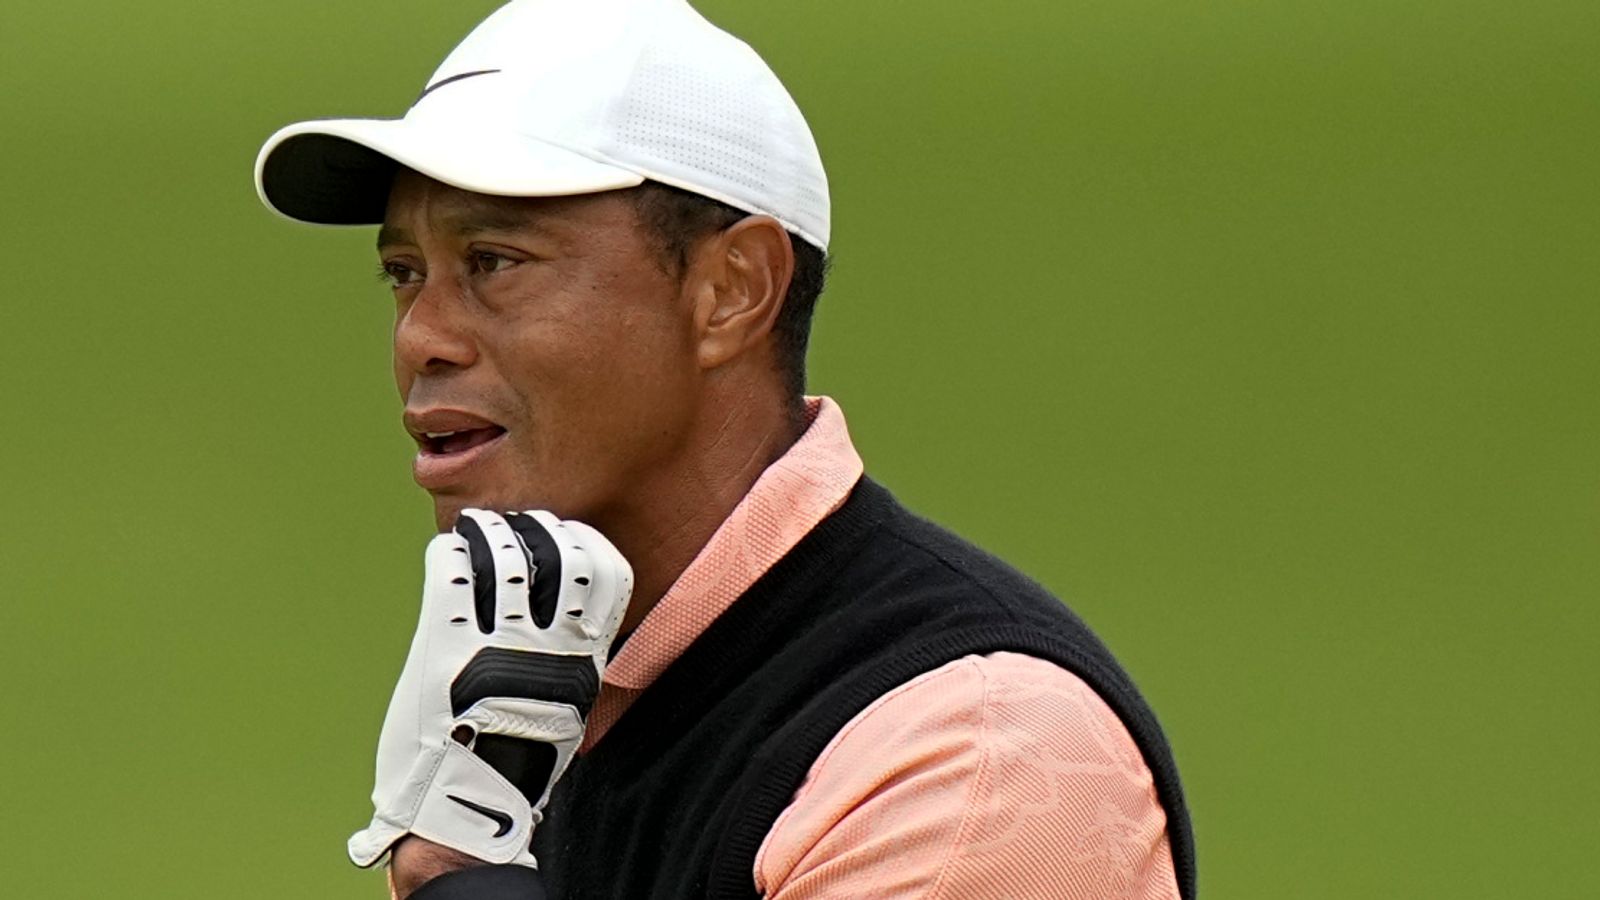 Tiger Woods confirms he won’t compete at US Open